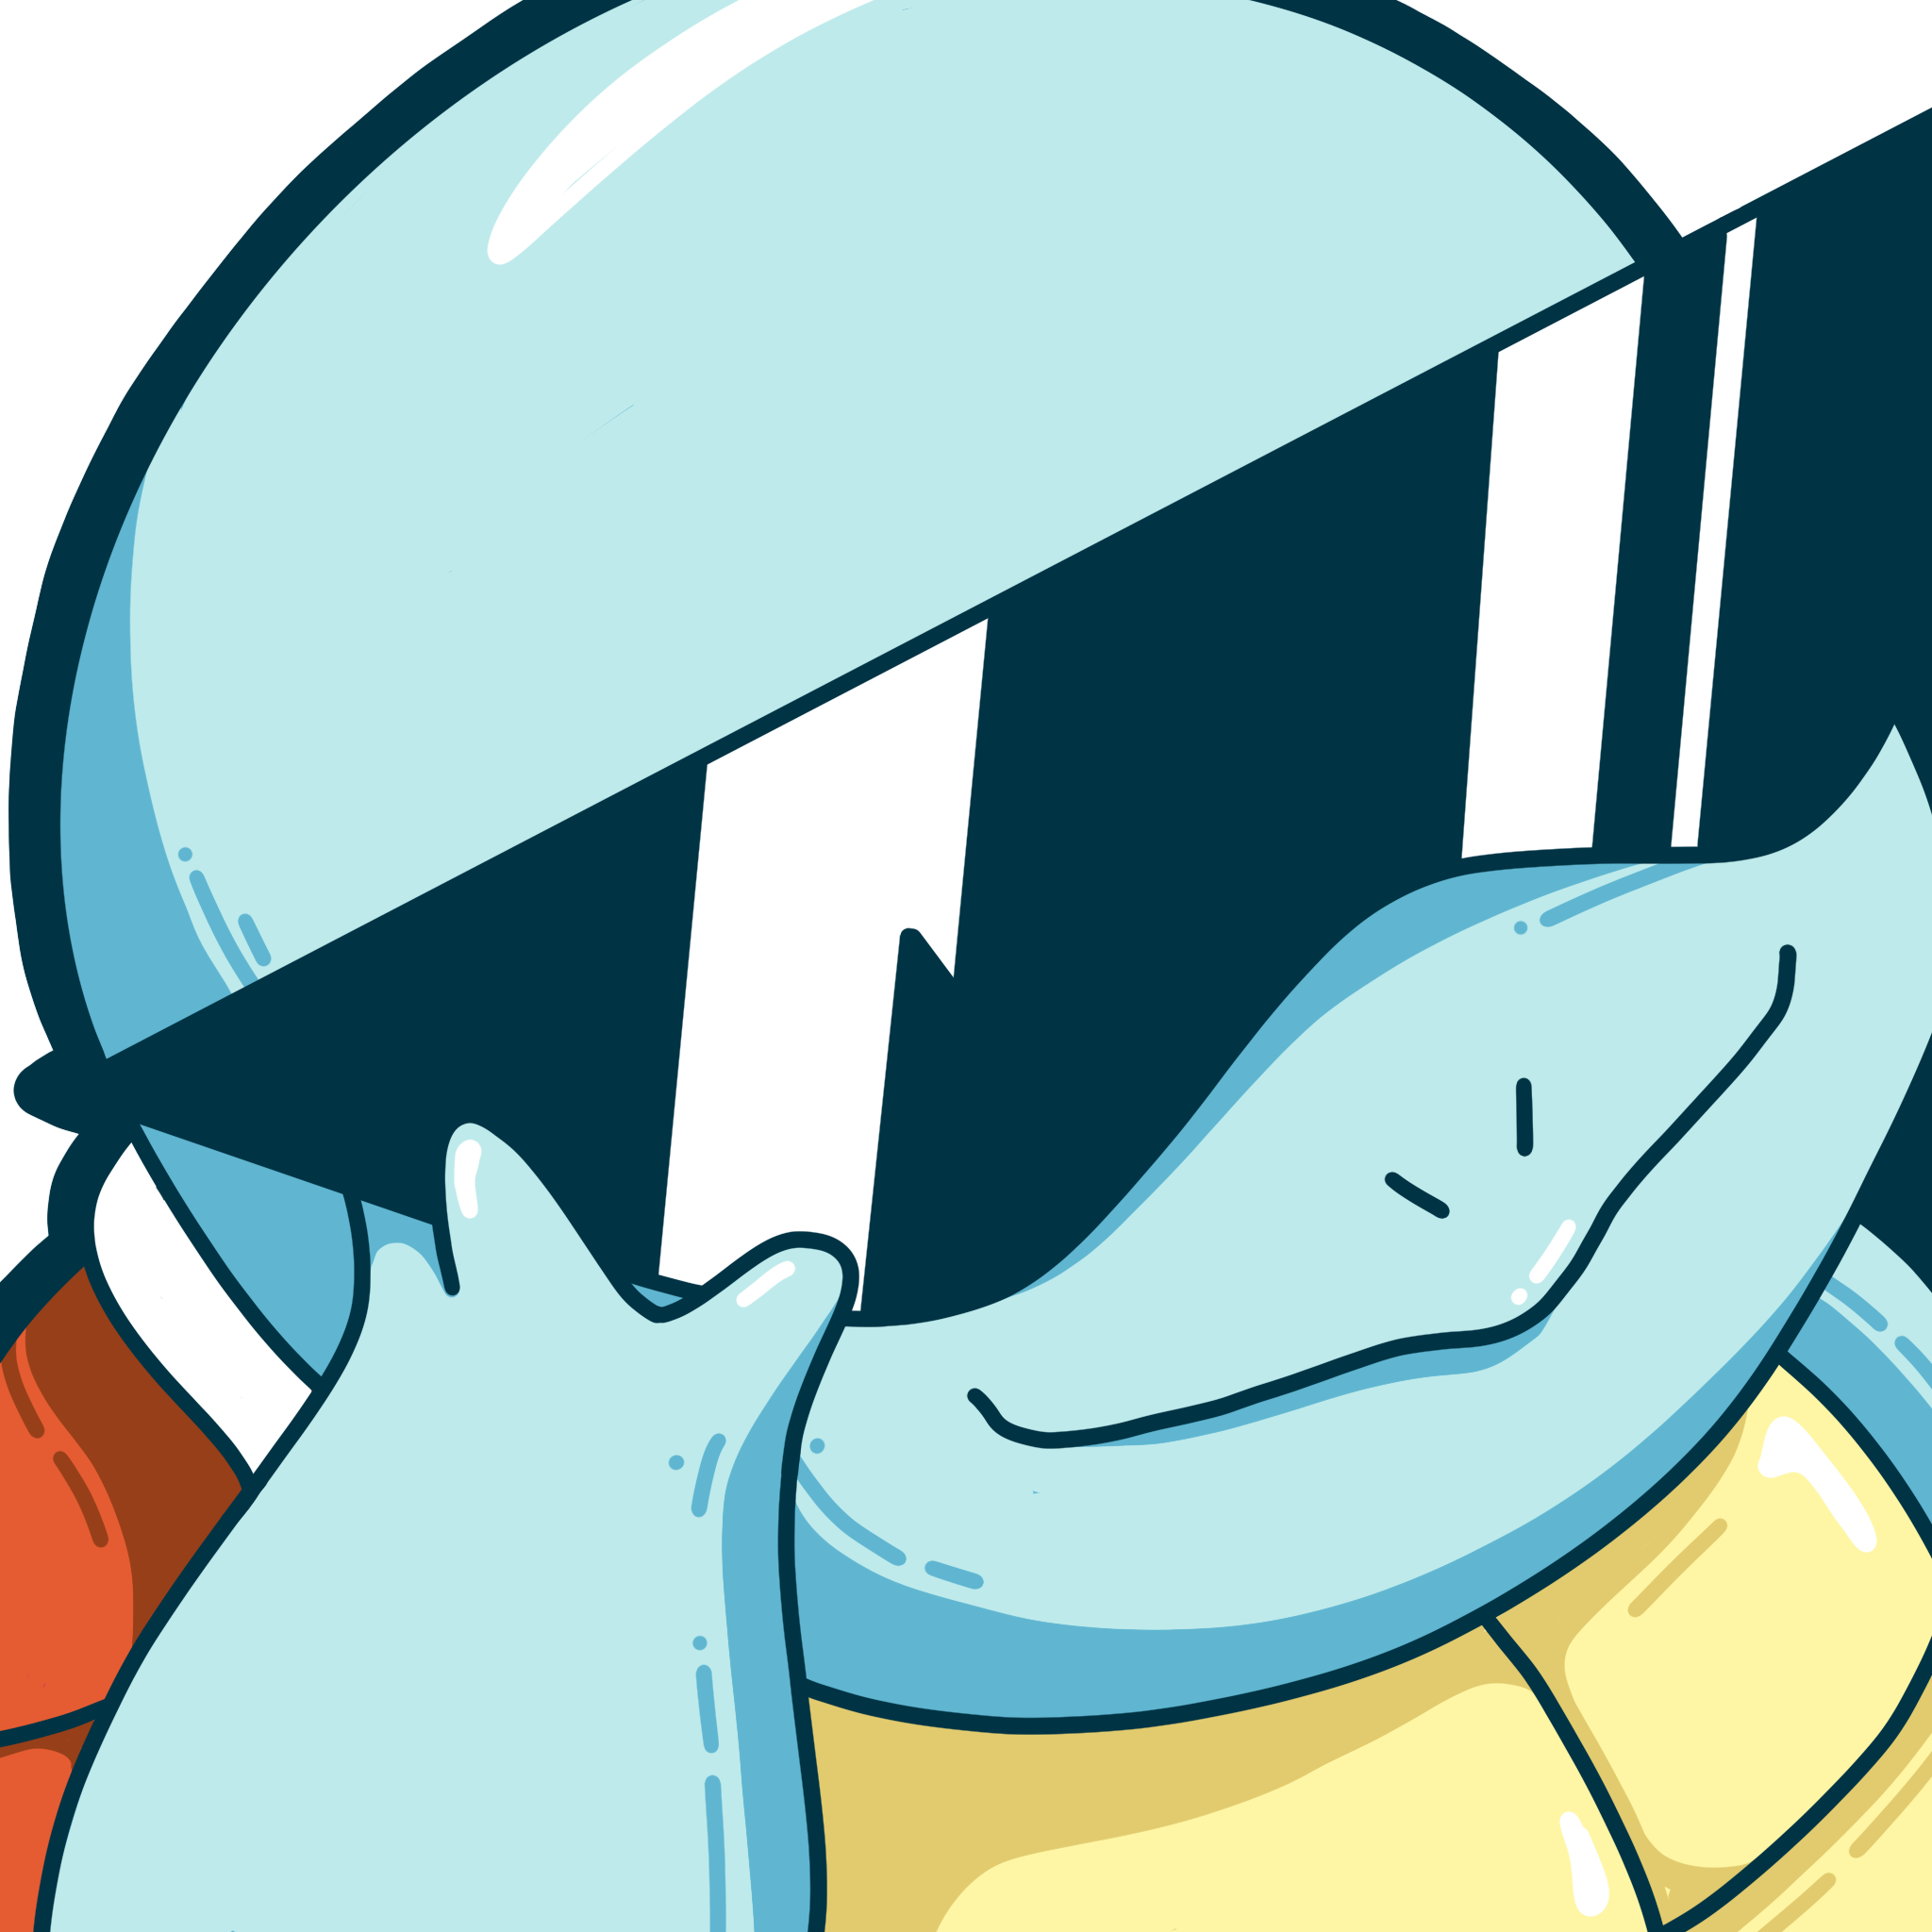 jft_SQUIRTLE_2048.png